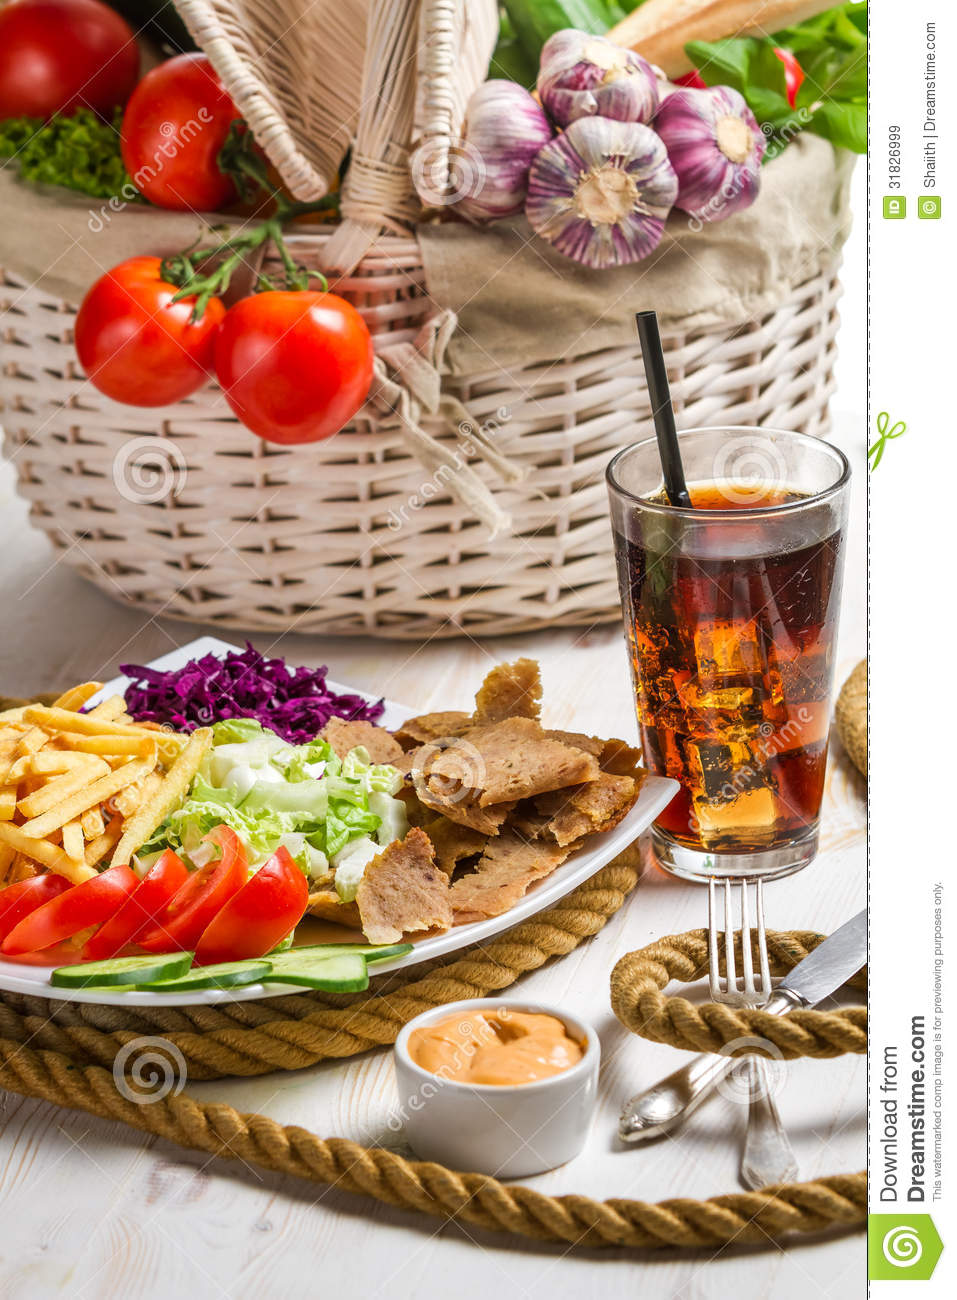 Main Dish Made With Vegetables And Meat Kebab On White Background 